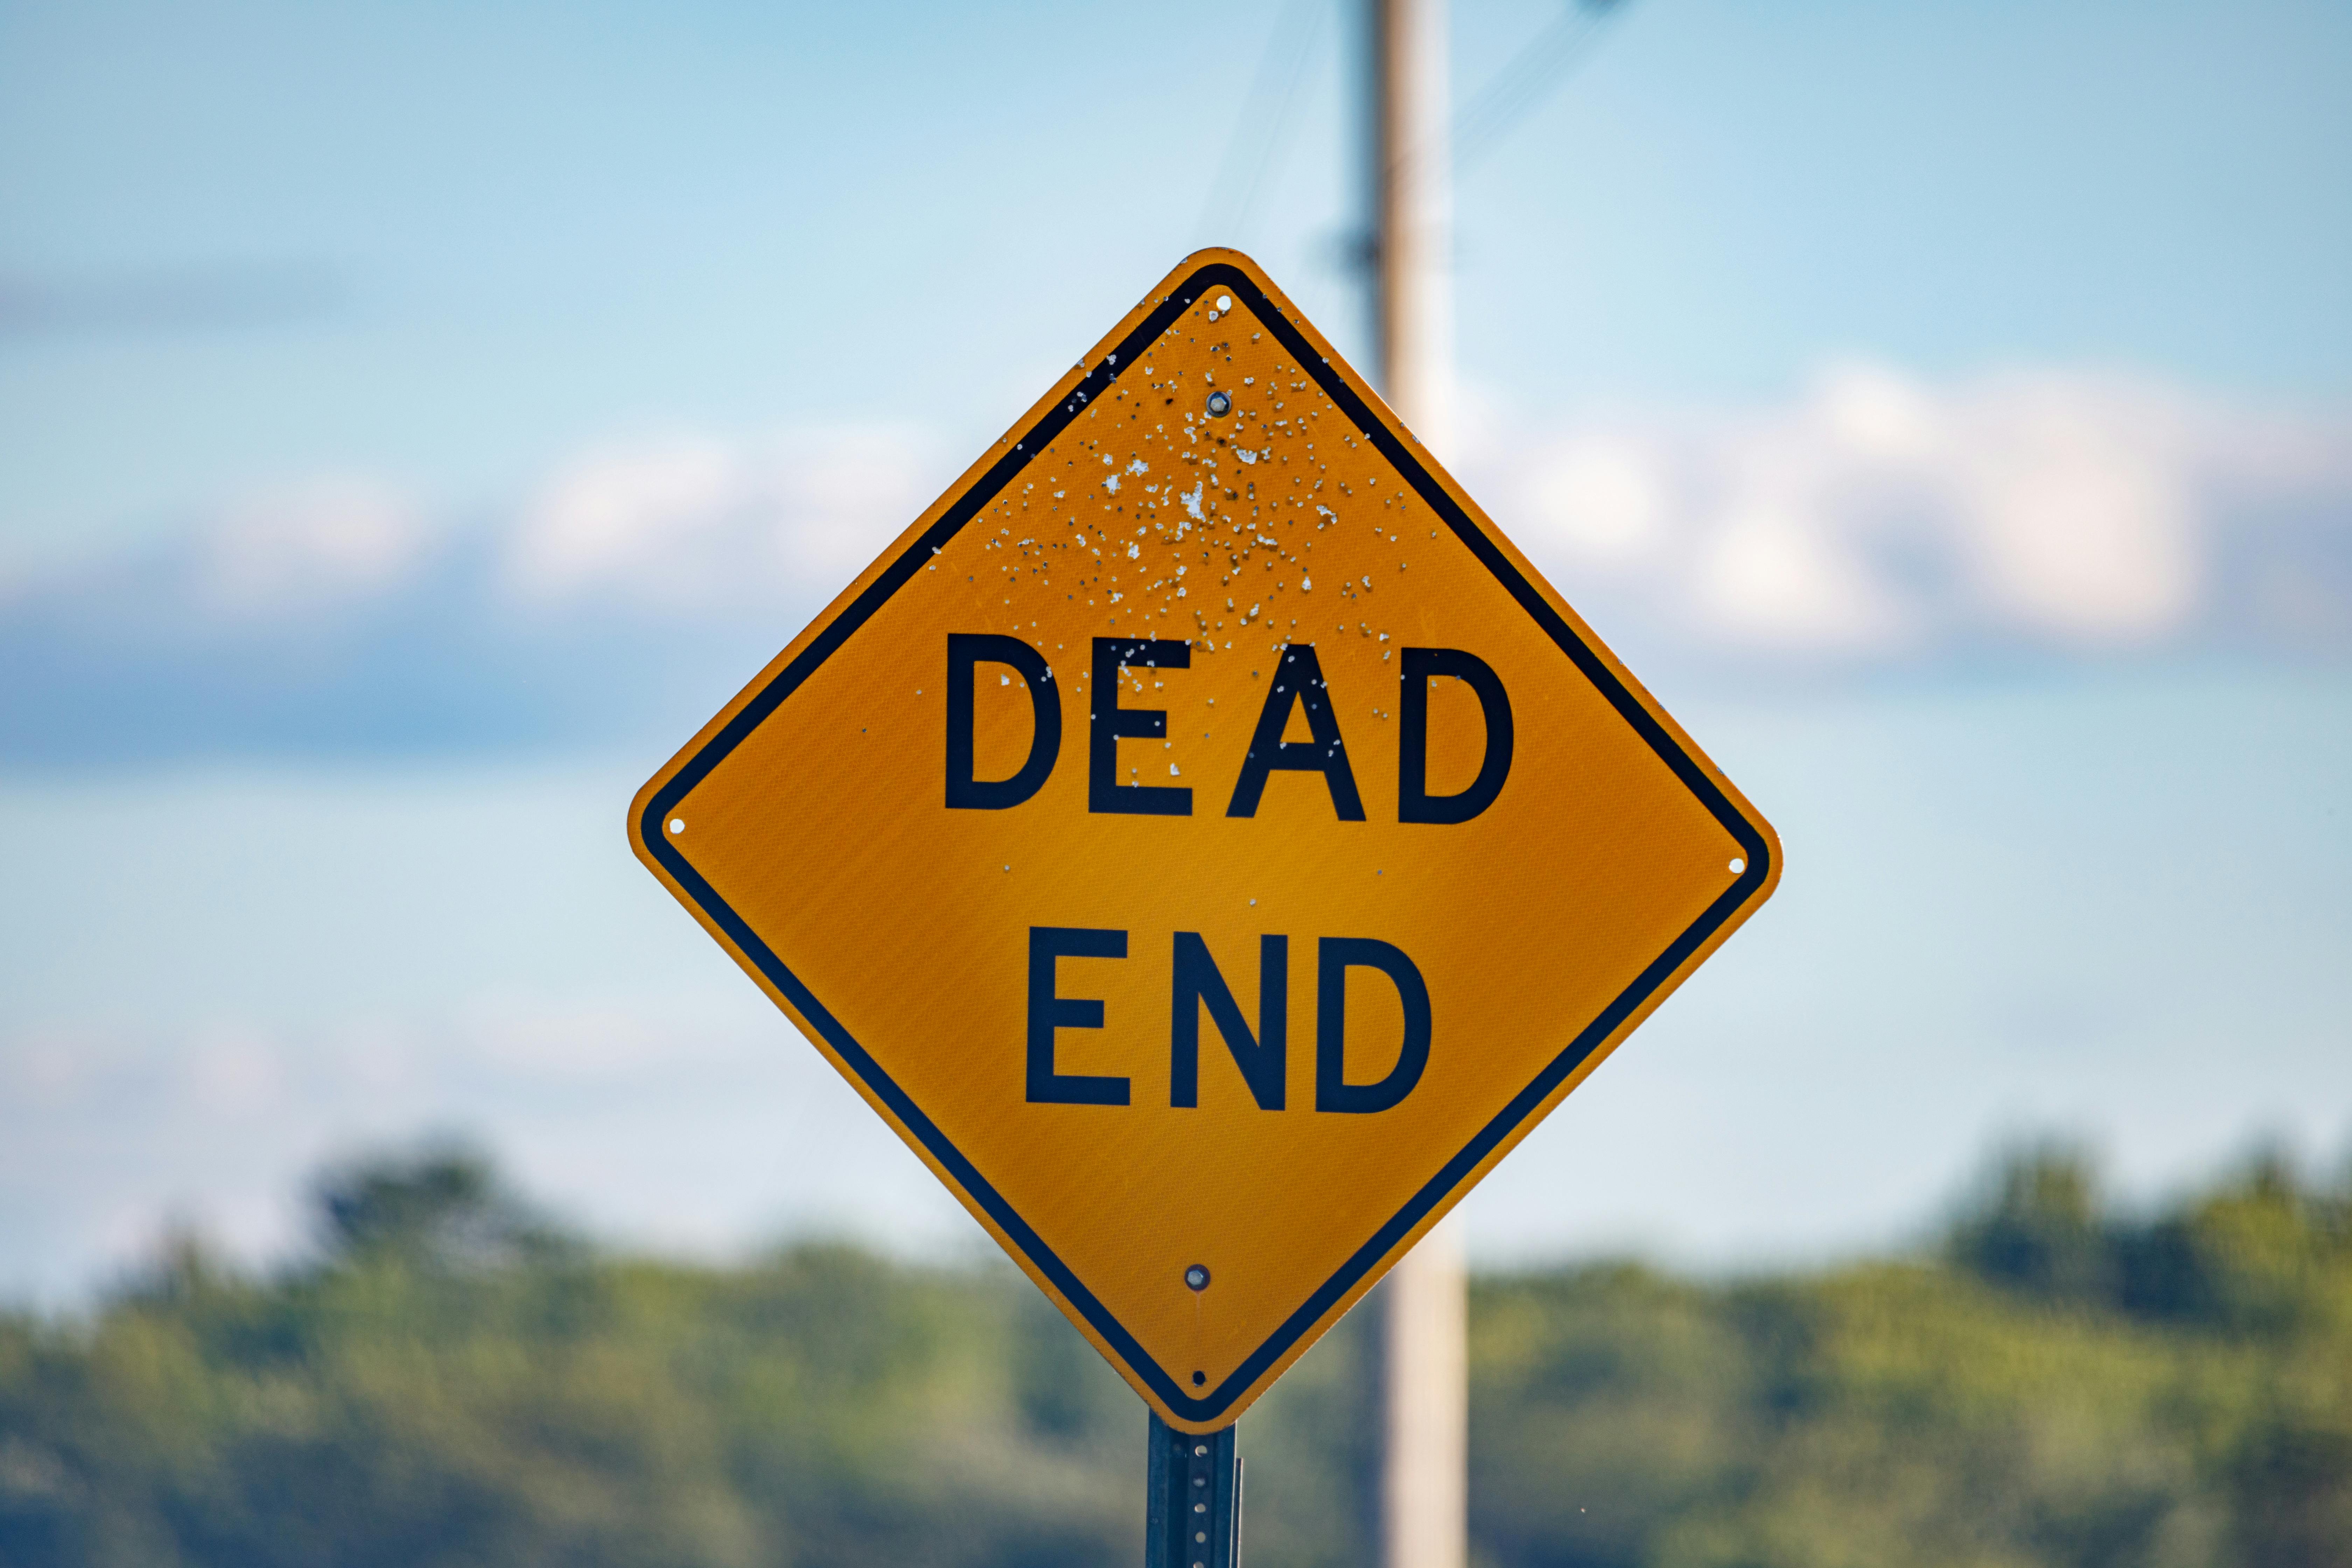 Dead End wallpaper by coolboy258  Download on ZEDGE  a215